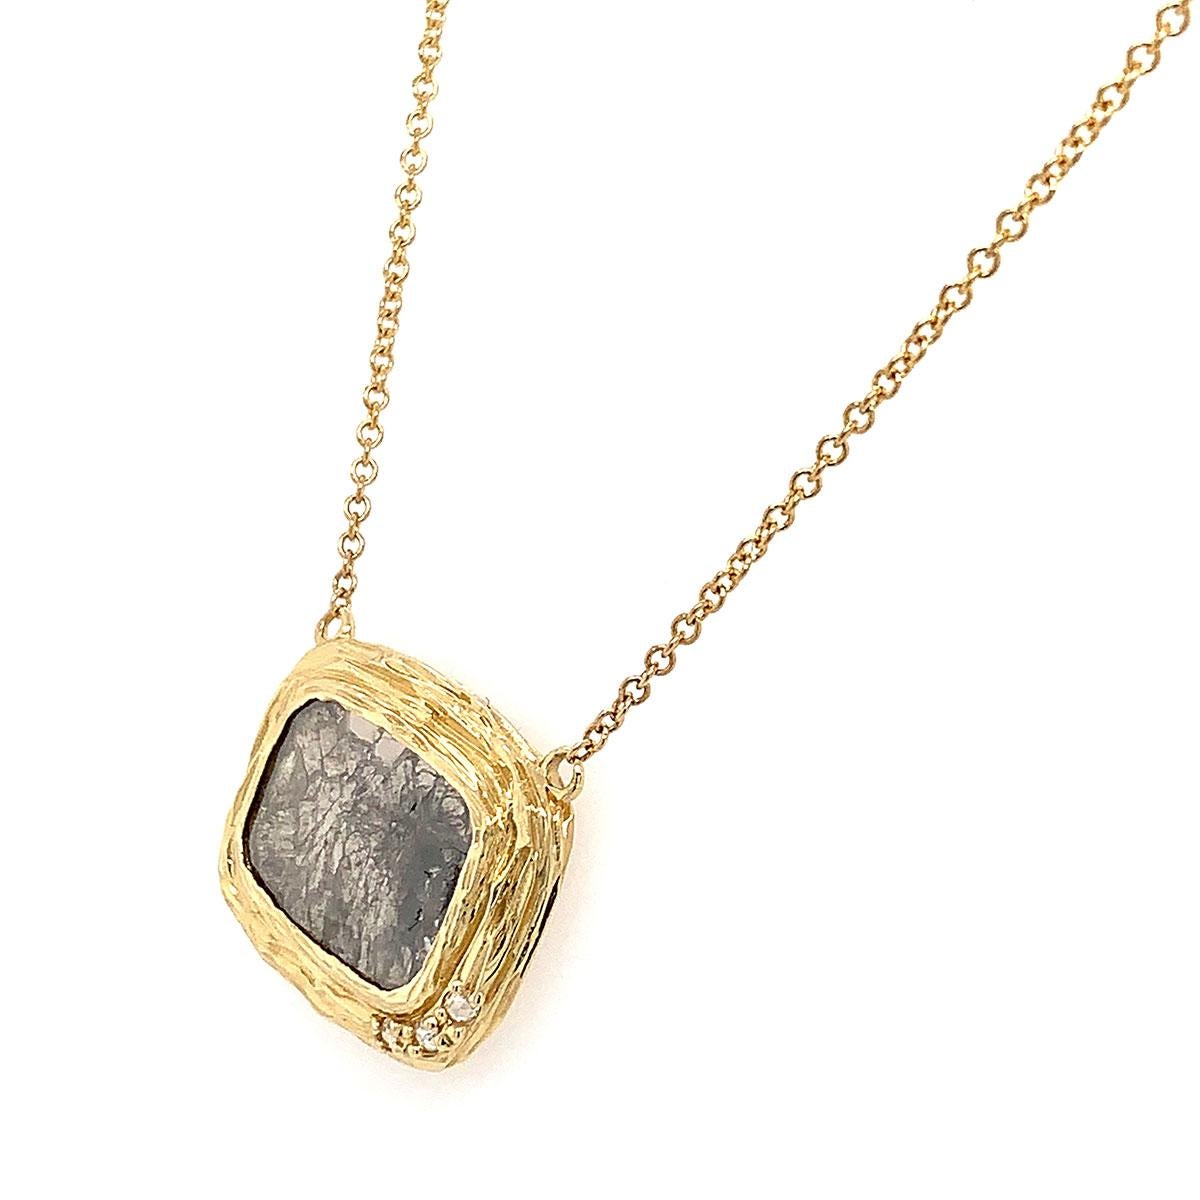 From our exclusive Alpinia collection, we are proud to present this handcrafted One-Of -A-Kind organic design necklace. An exotic combination of a elongated cushion shape Rosetta Salt & Pepper natural diamond, and three  black round cut diamonds